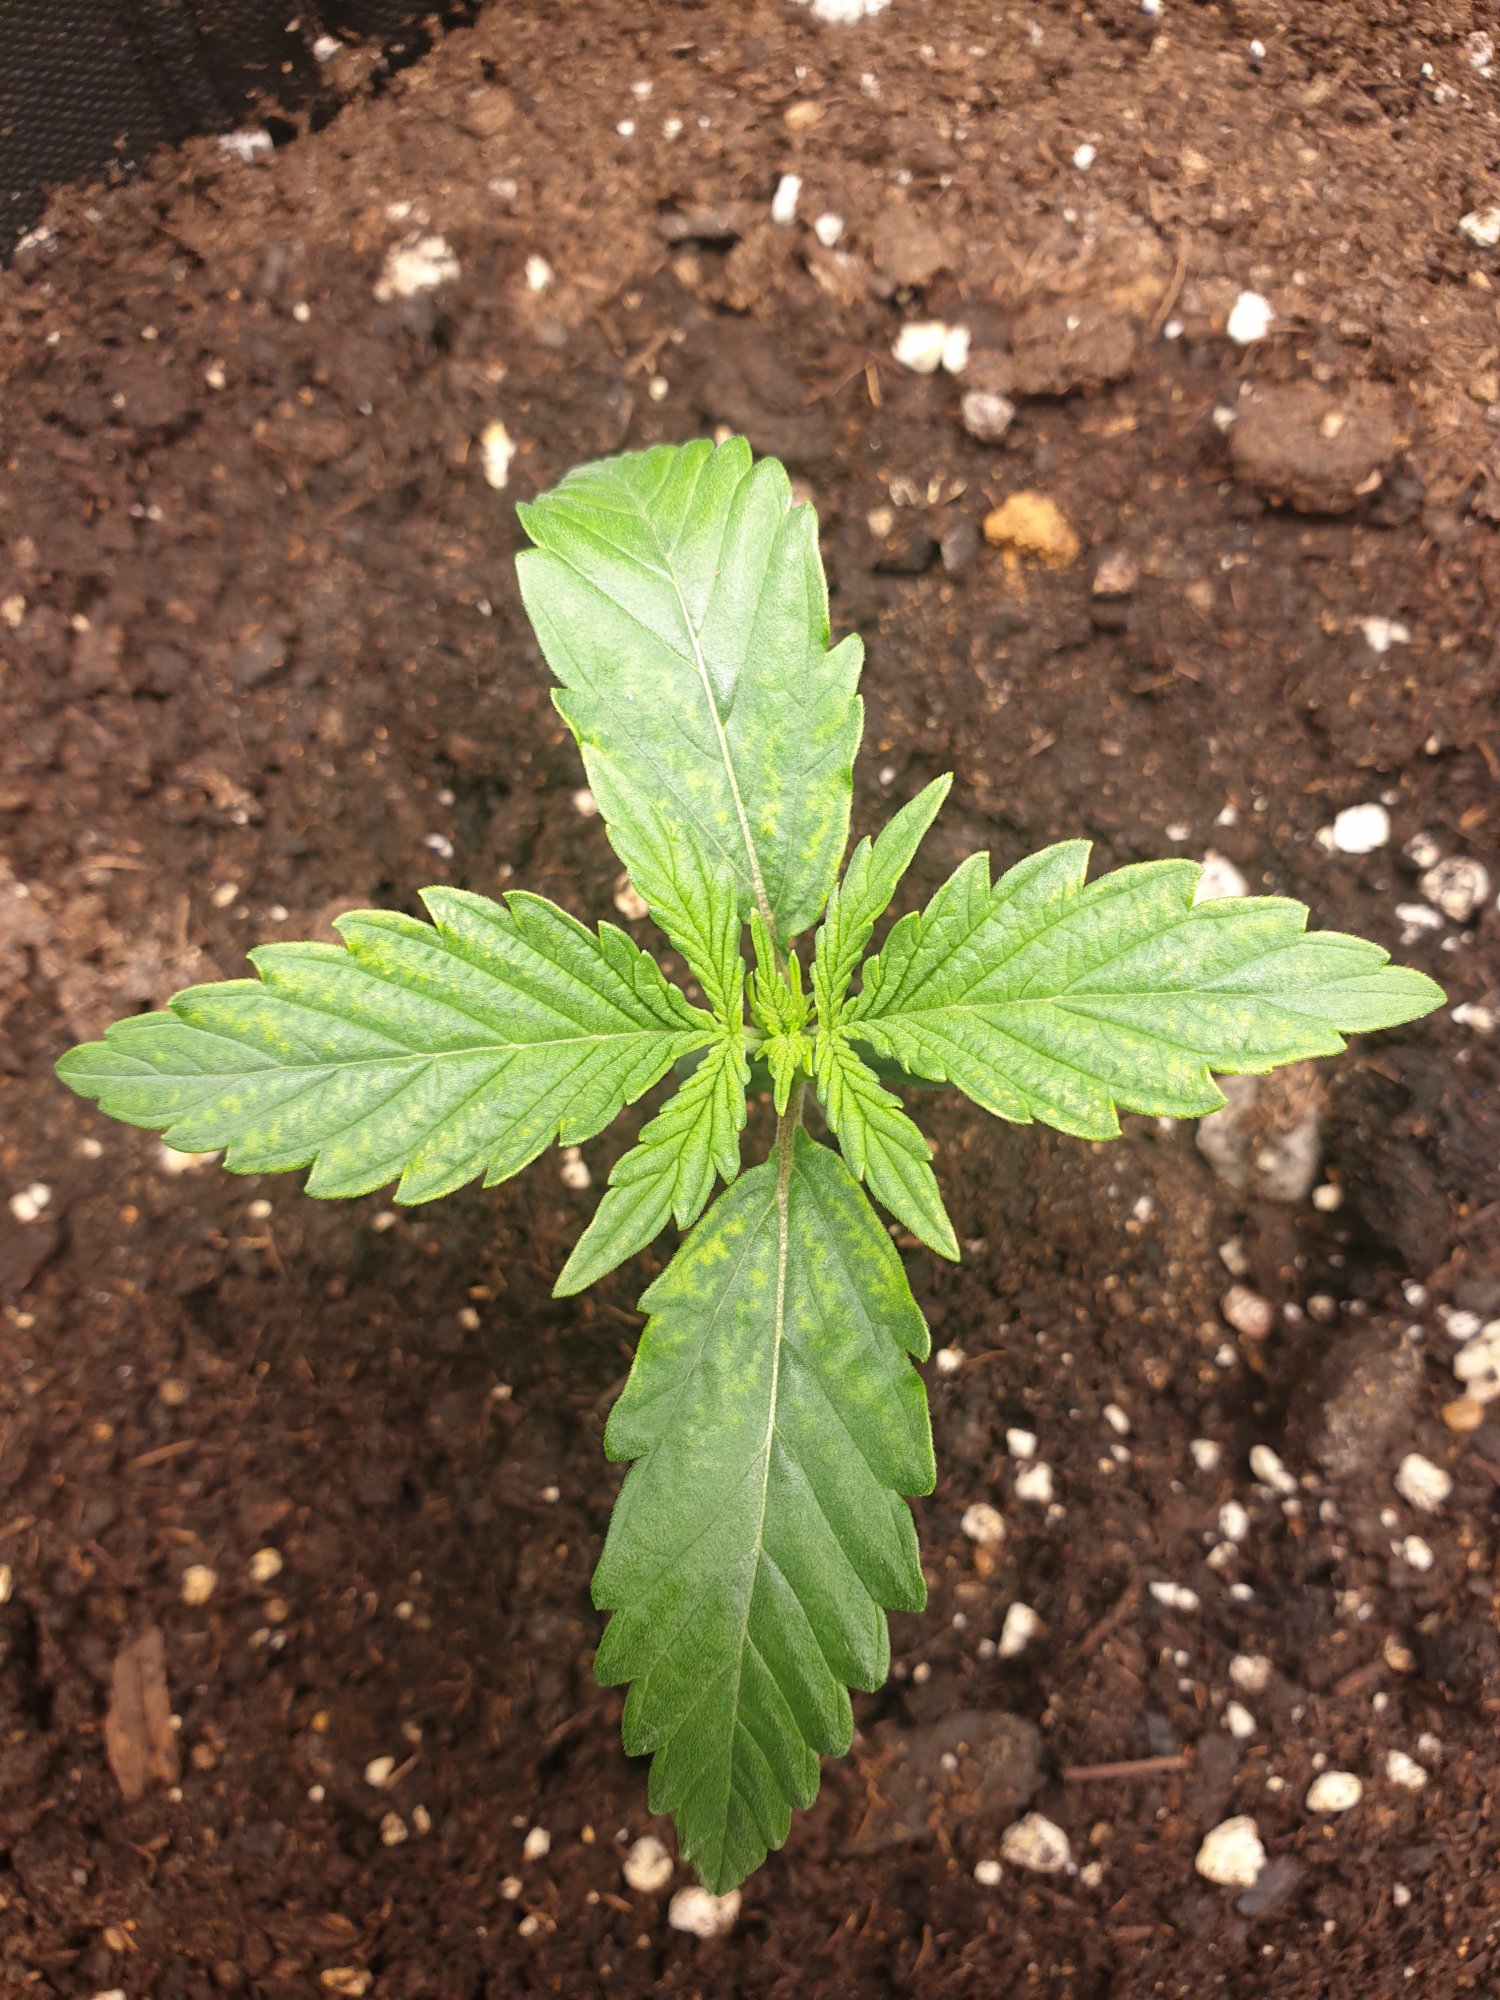 11-day-old-seedling-showing-white-spots-why.jpg